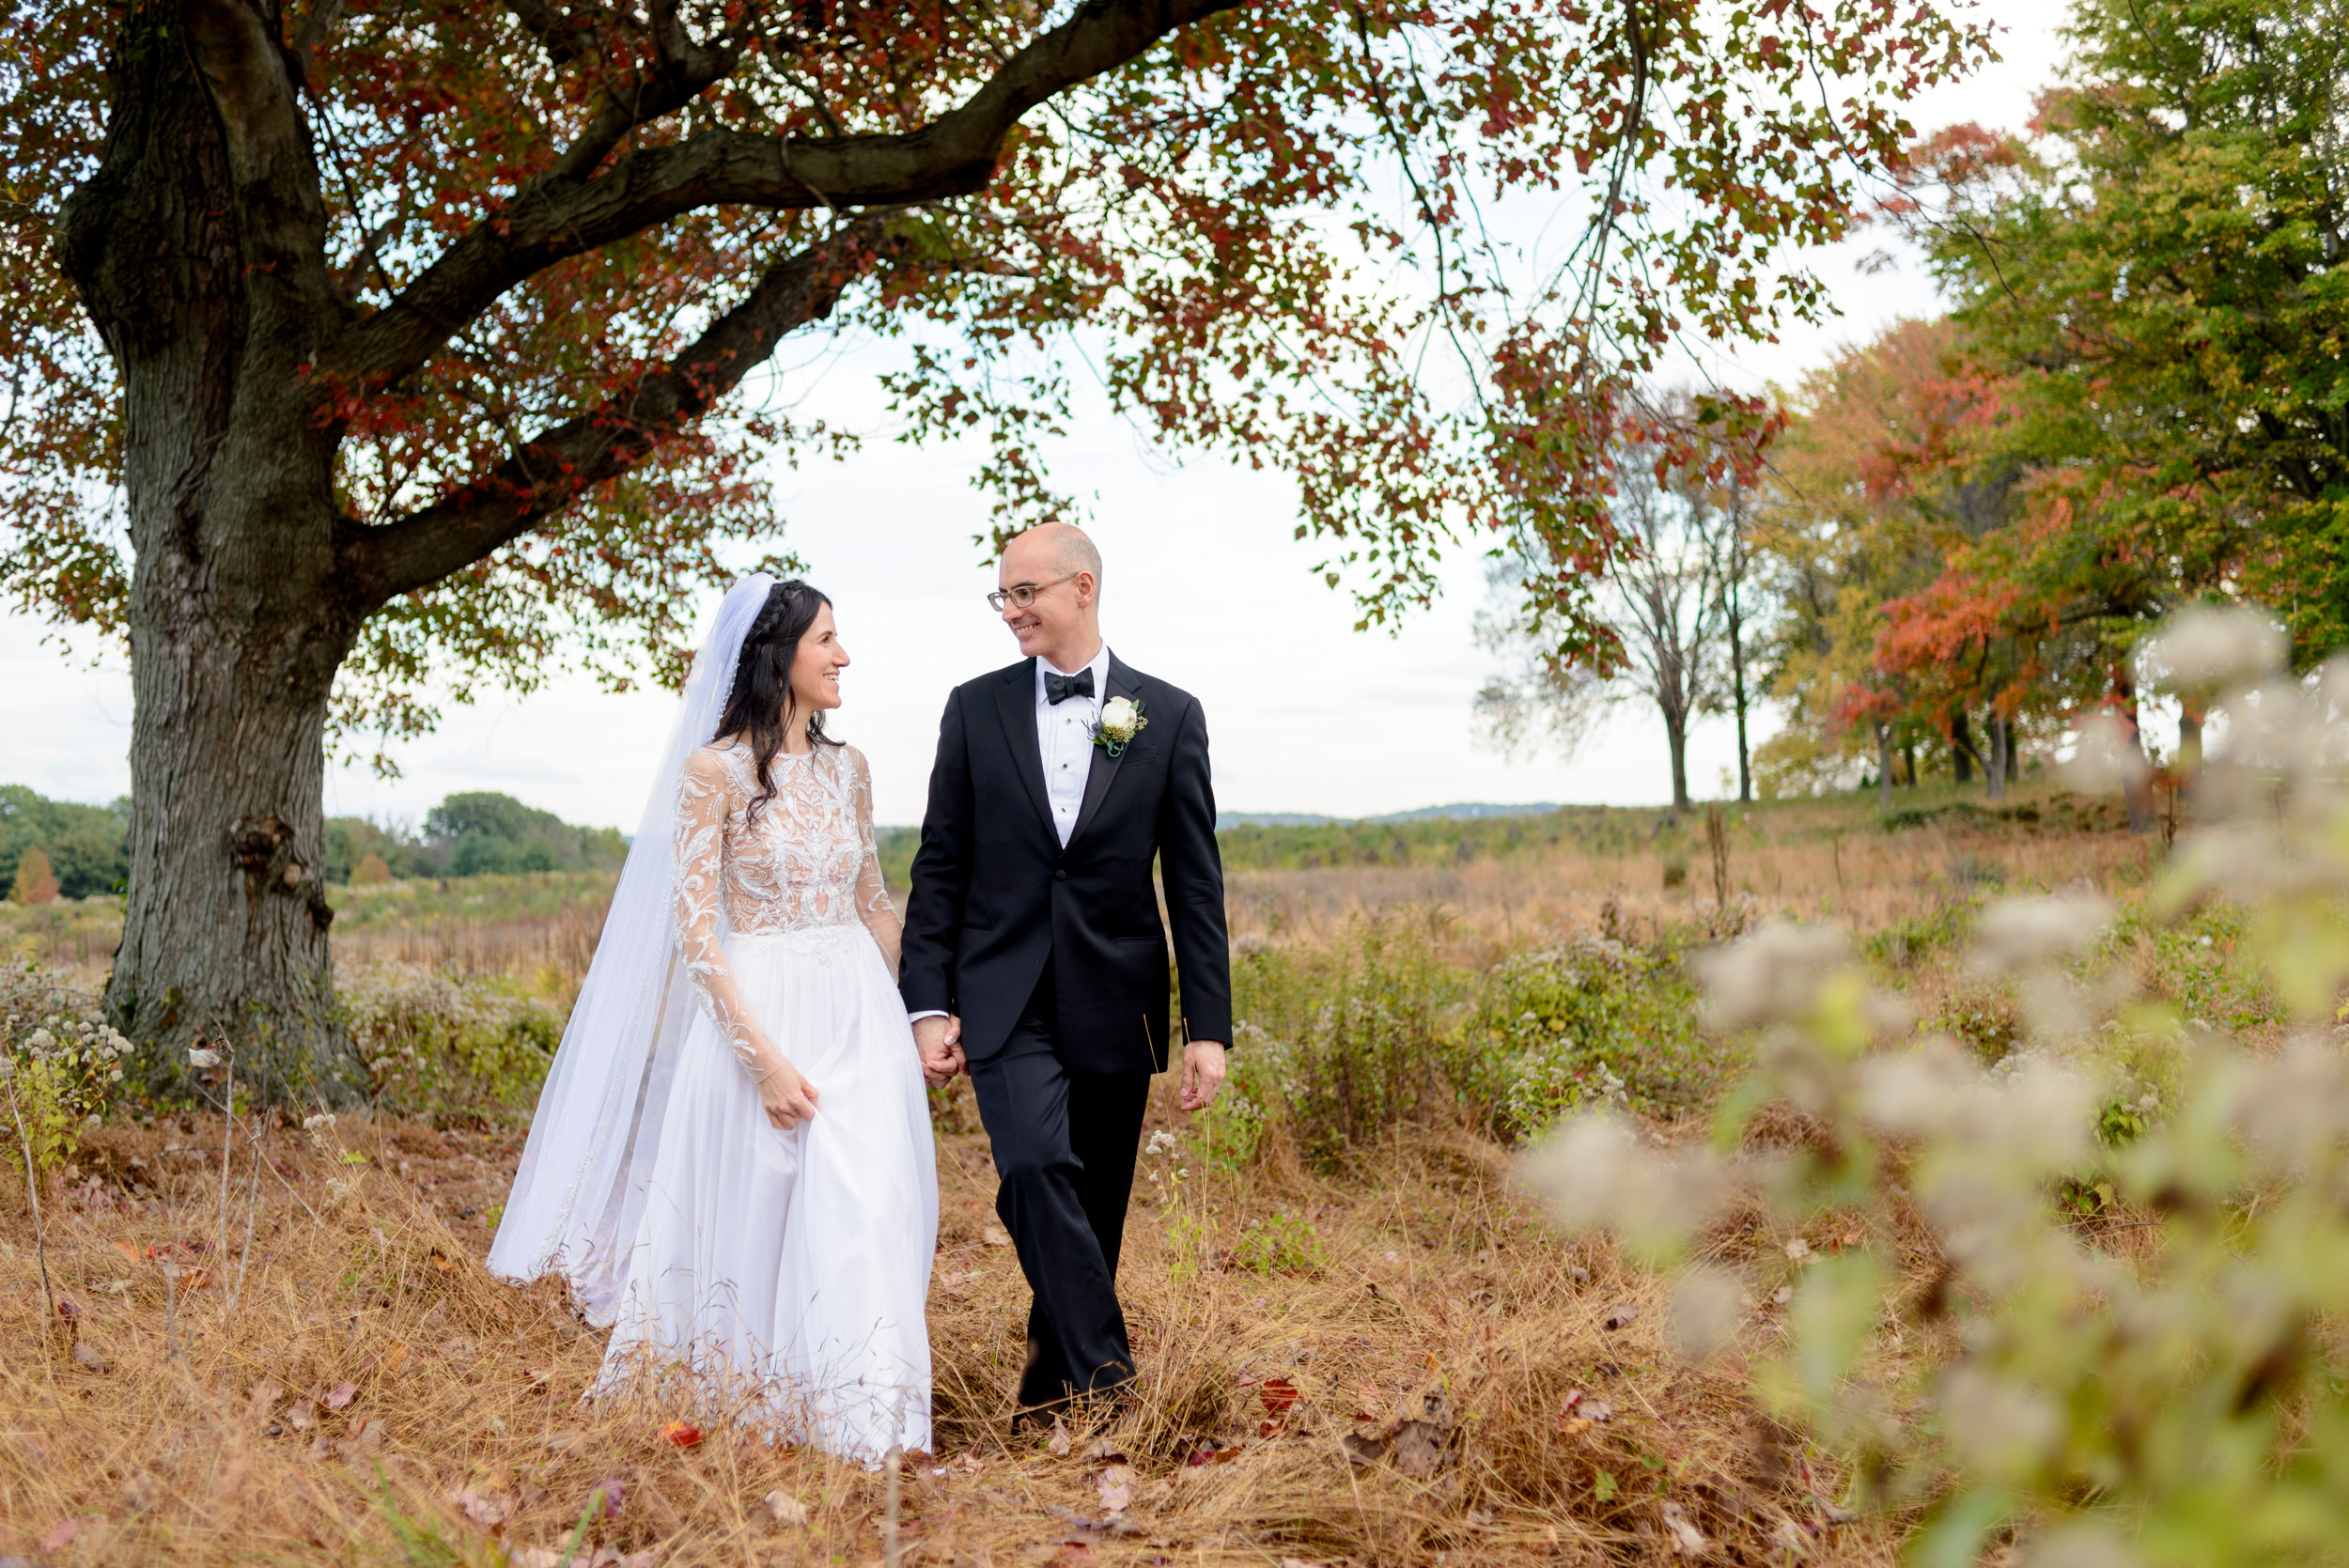 Bride and groom photos at Valley Forge National Historical Park